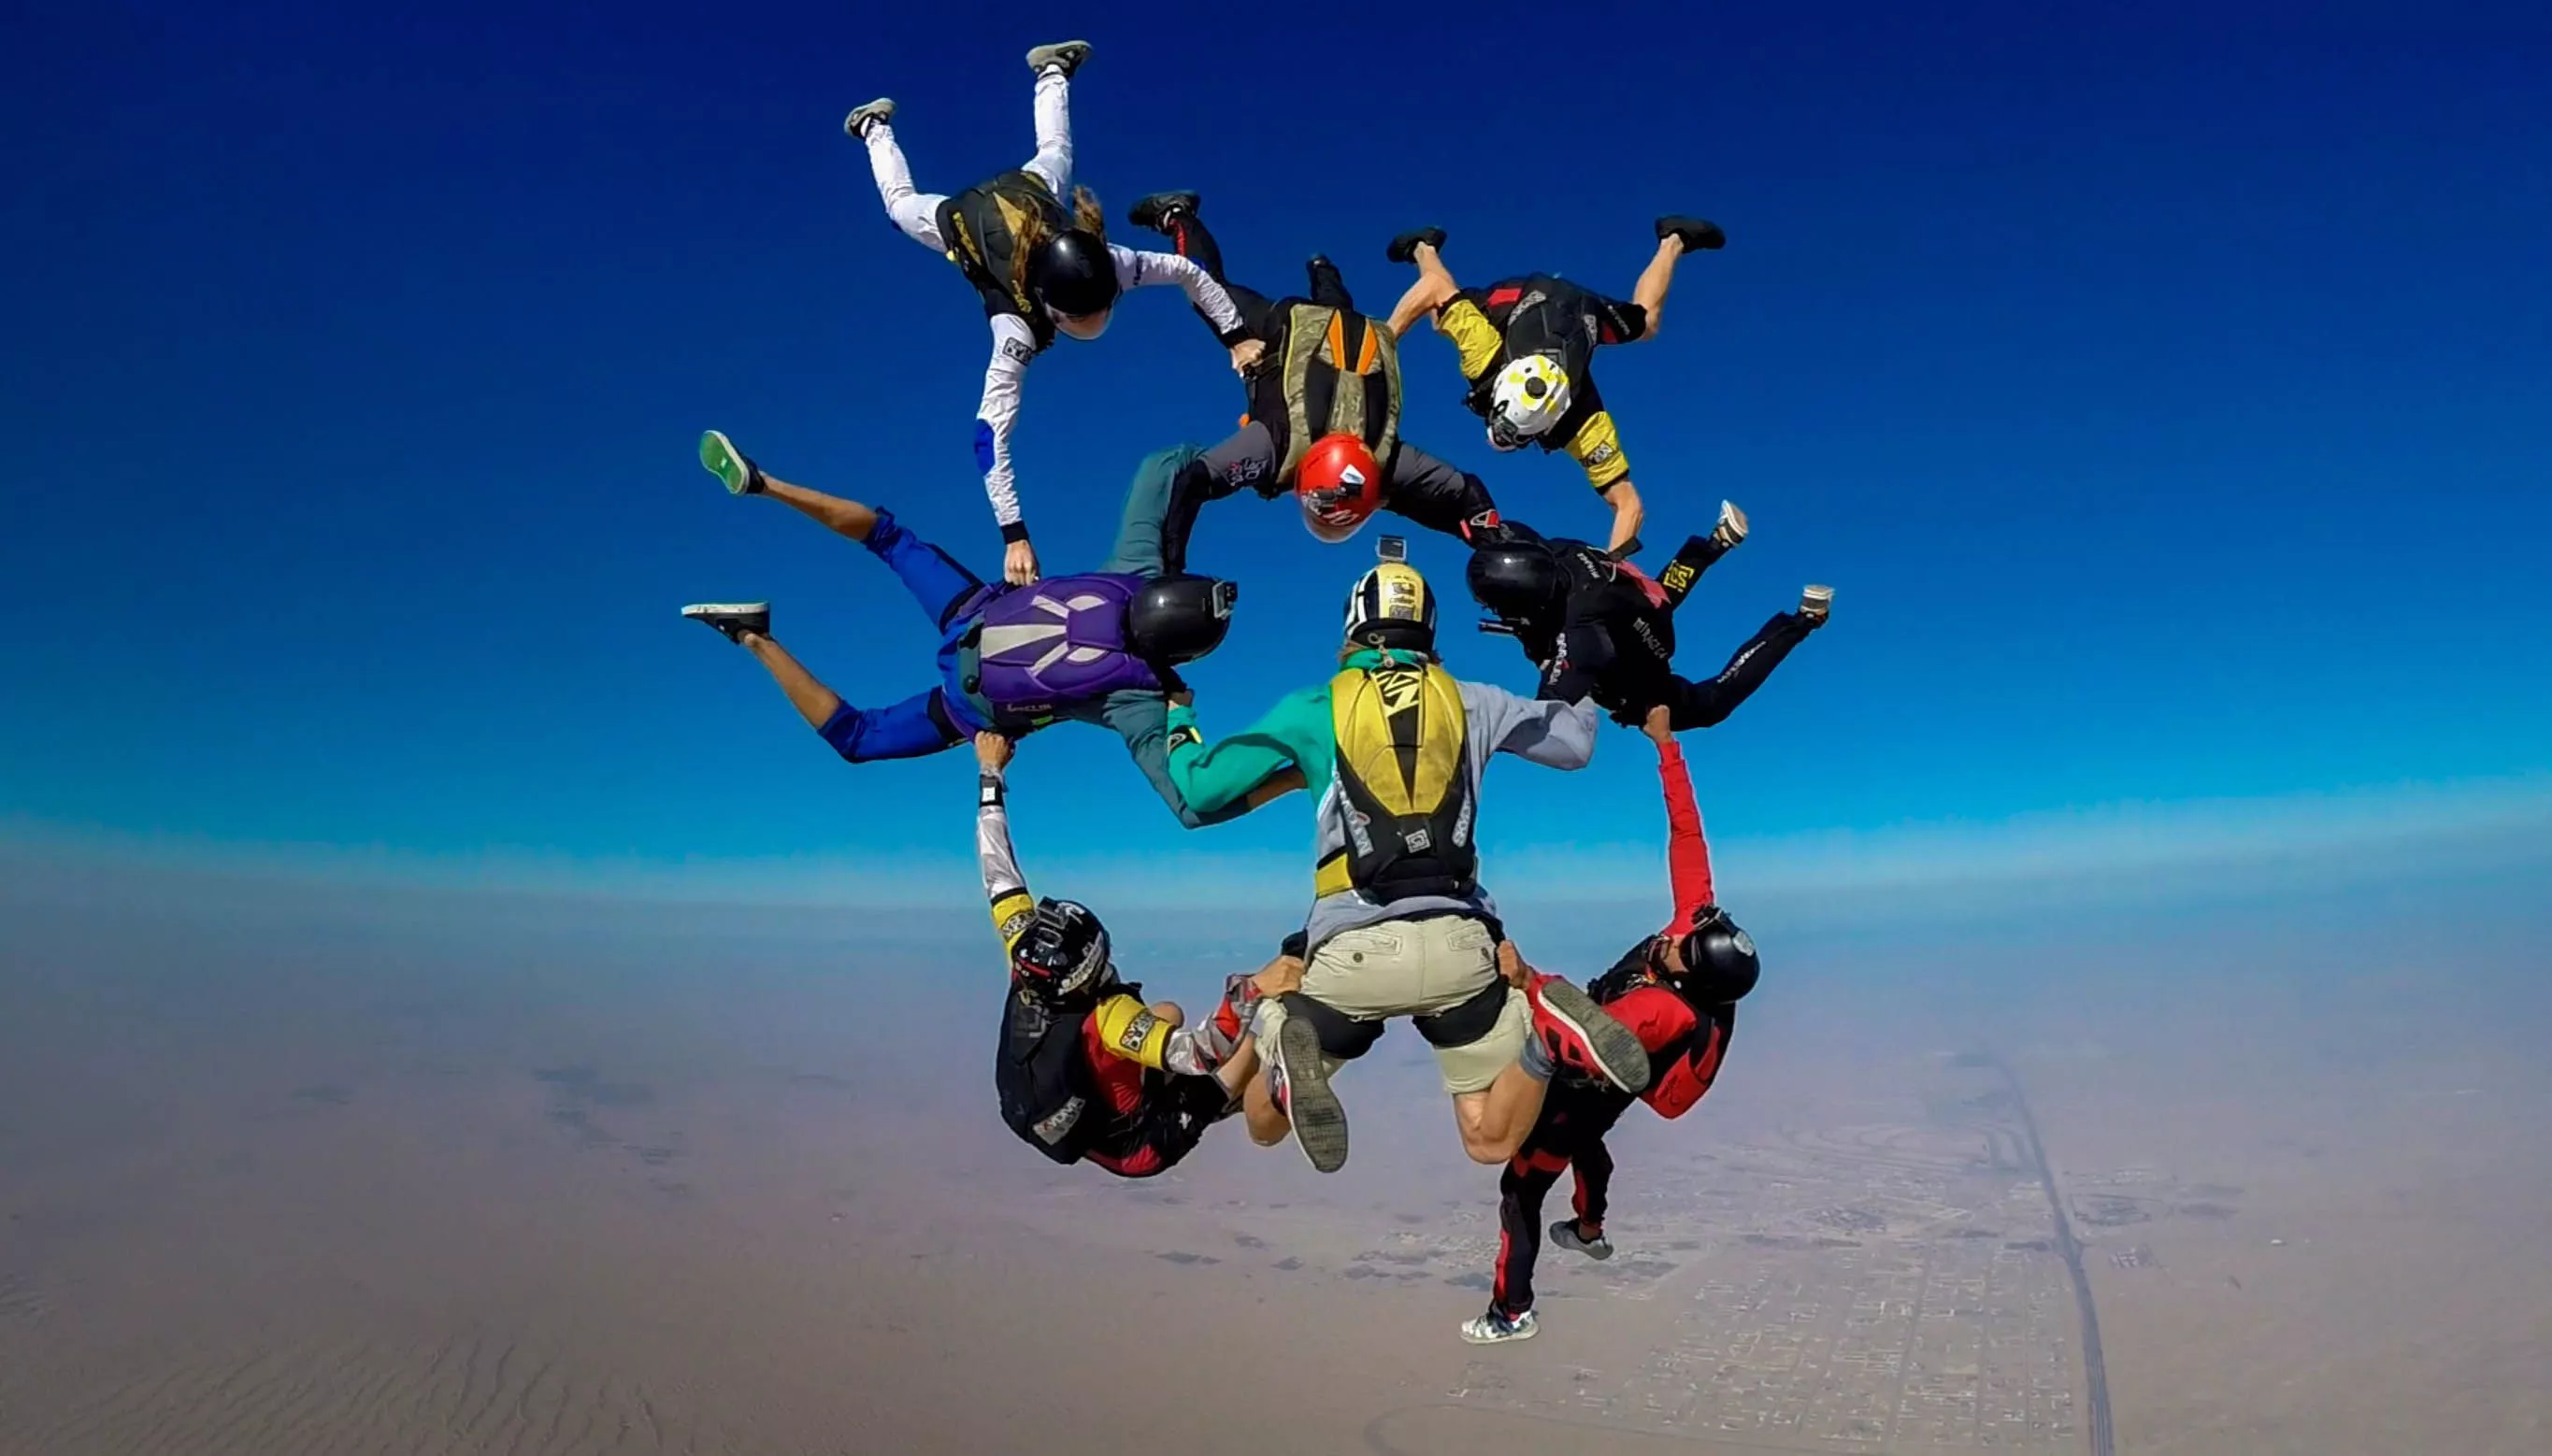 Fly Zone in Italy, Europe | Skydiving - Rated 0.9